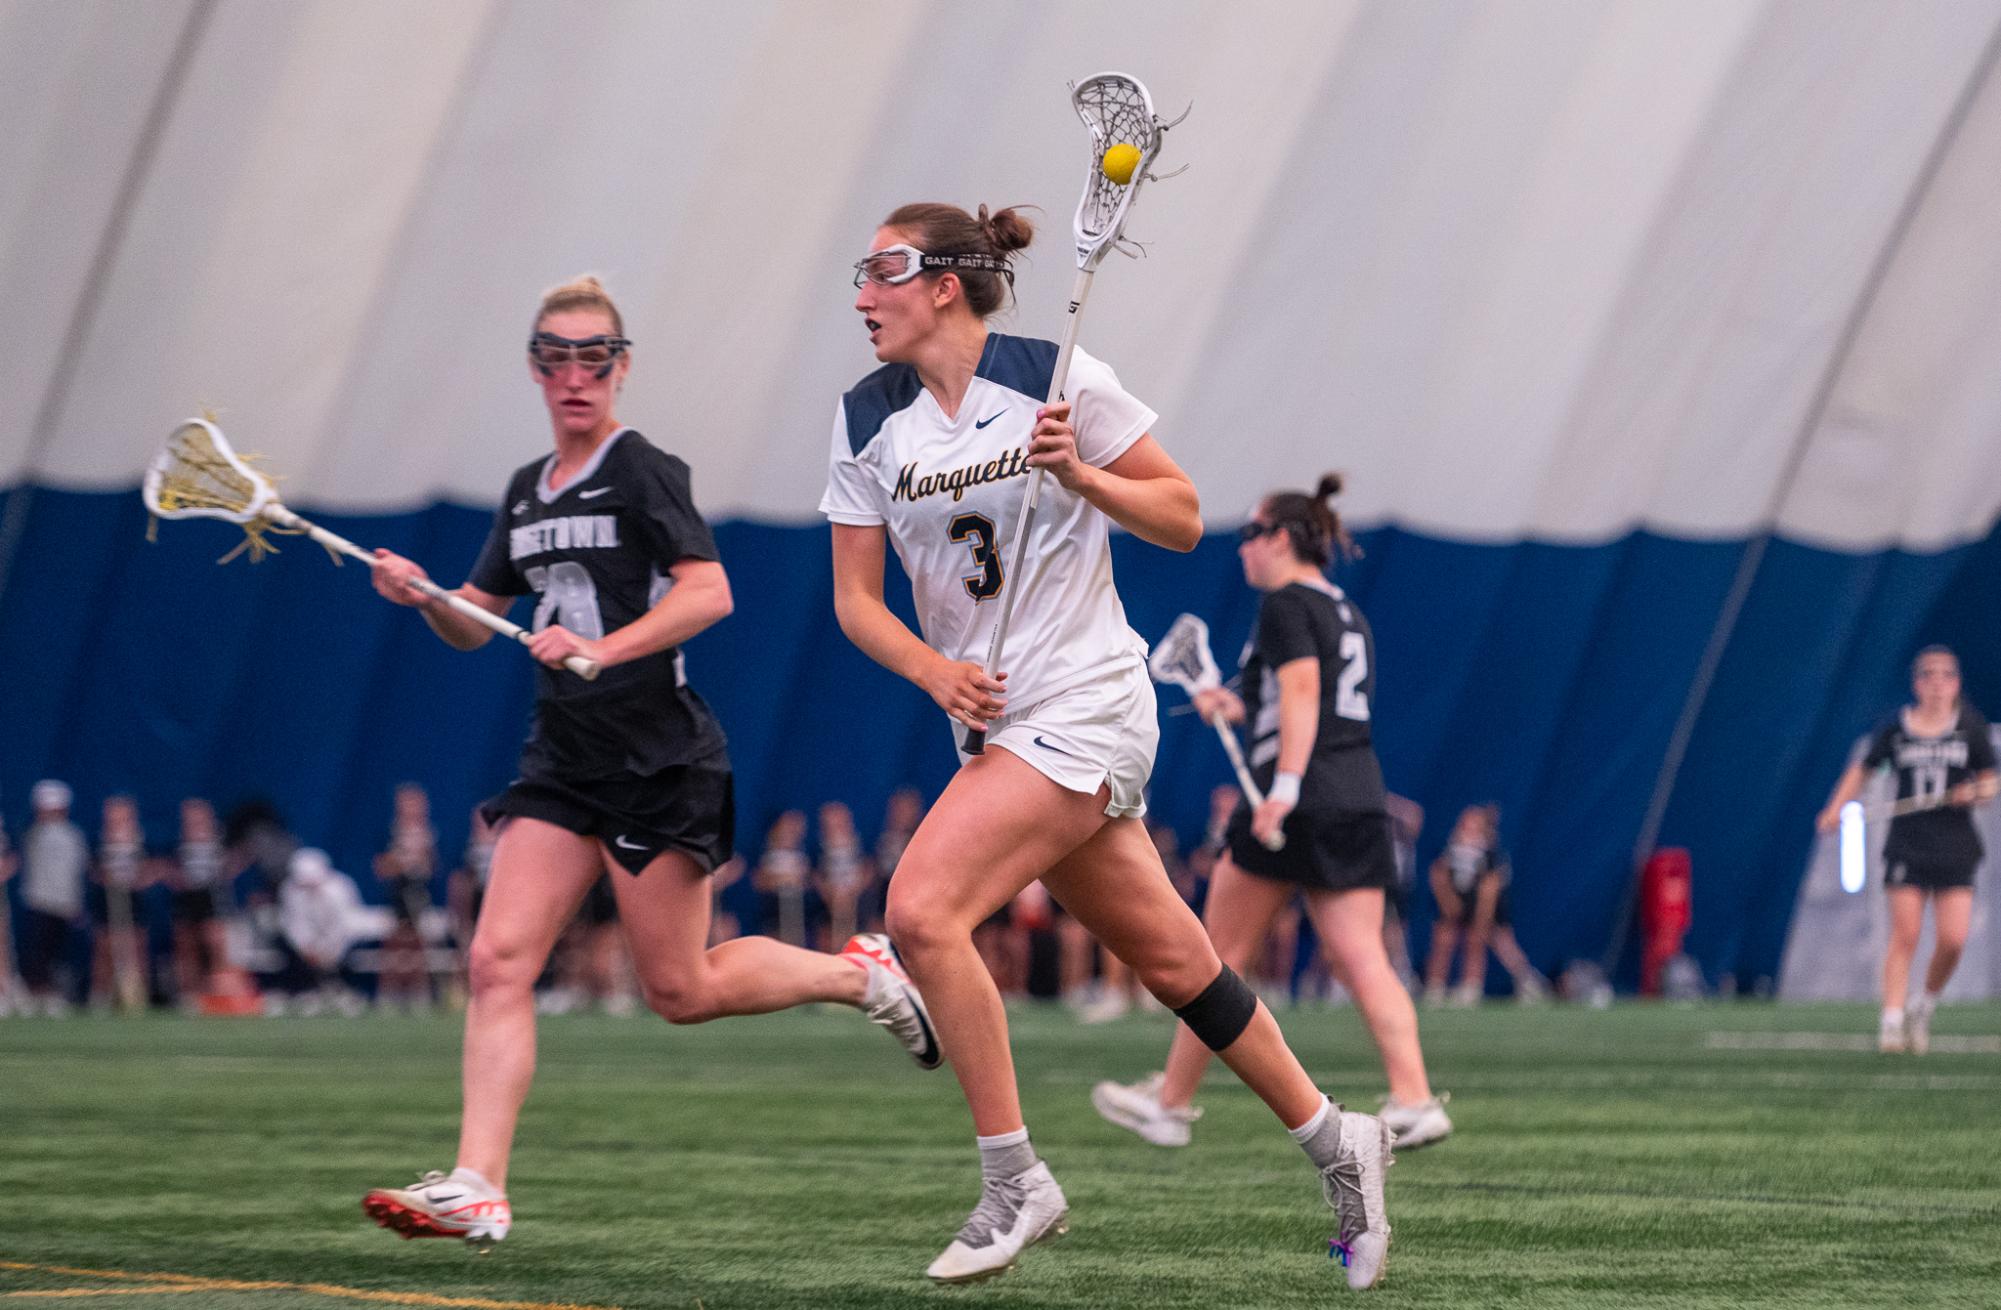 Marquette Lacrosse Suffers Losses: Penalties and Turnovers Plague Women’s Team, Kropp Shines; Men’s Team Looks to Rebound